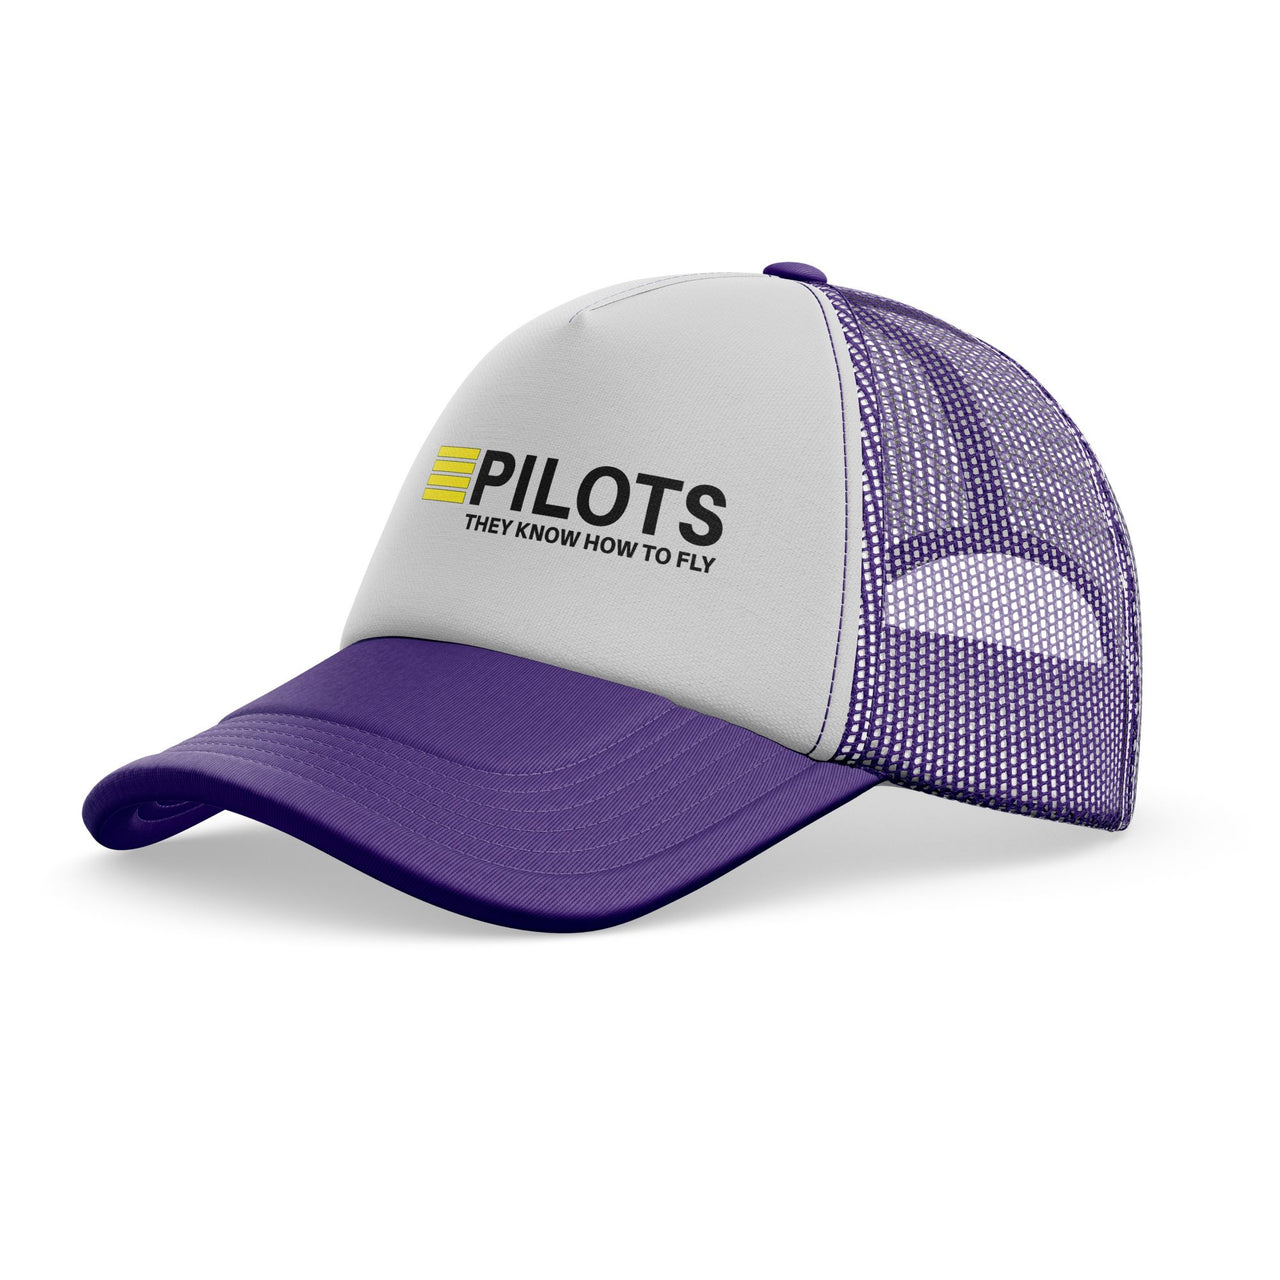 Pilots They Know How To Fly Designed Trucker Caps & Hats